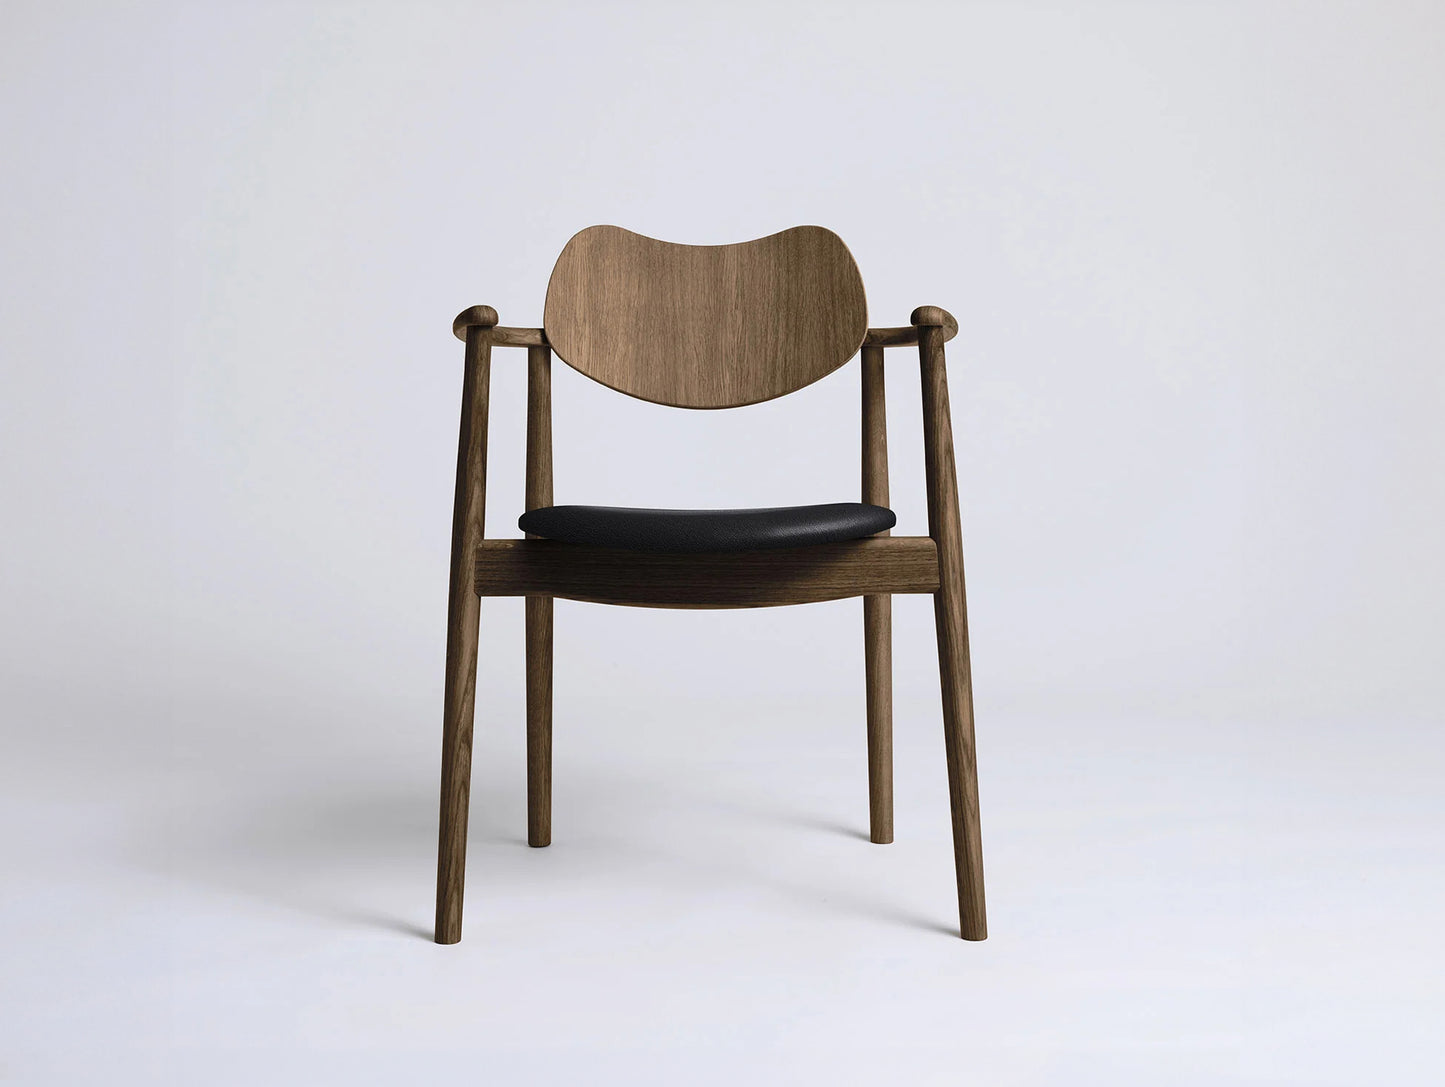 Regatta Chair Seat Upholstered by Ro Collection - Smoked Oak / Standard Sierra Black Leather